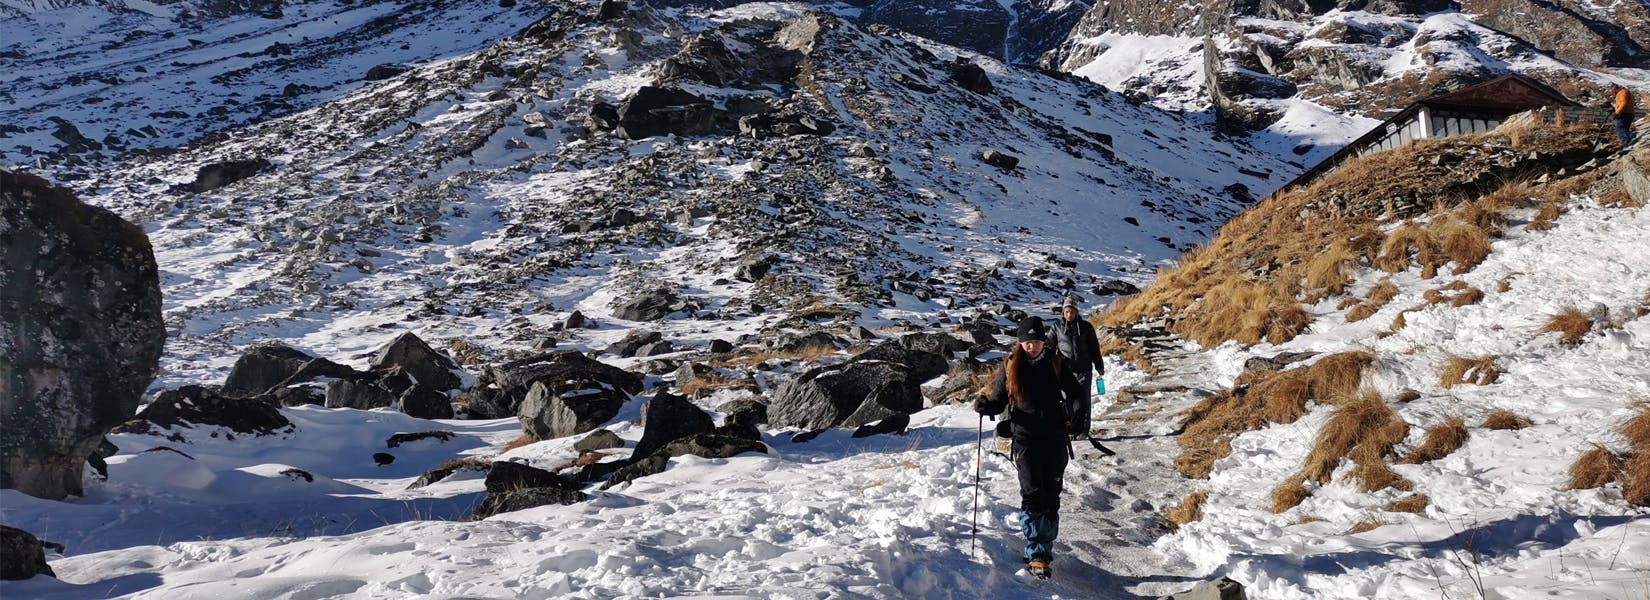 Annapurna Base Camp (ABC) Trekking Info for March to May and September to January